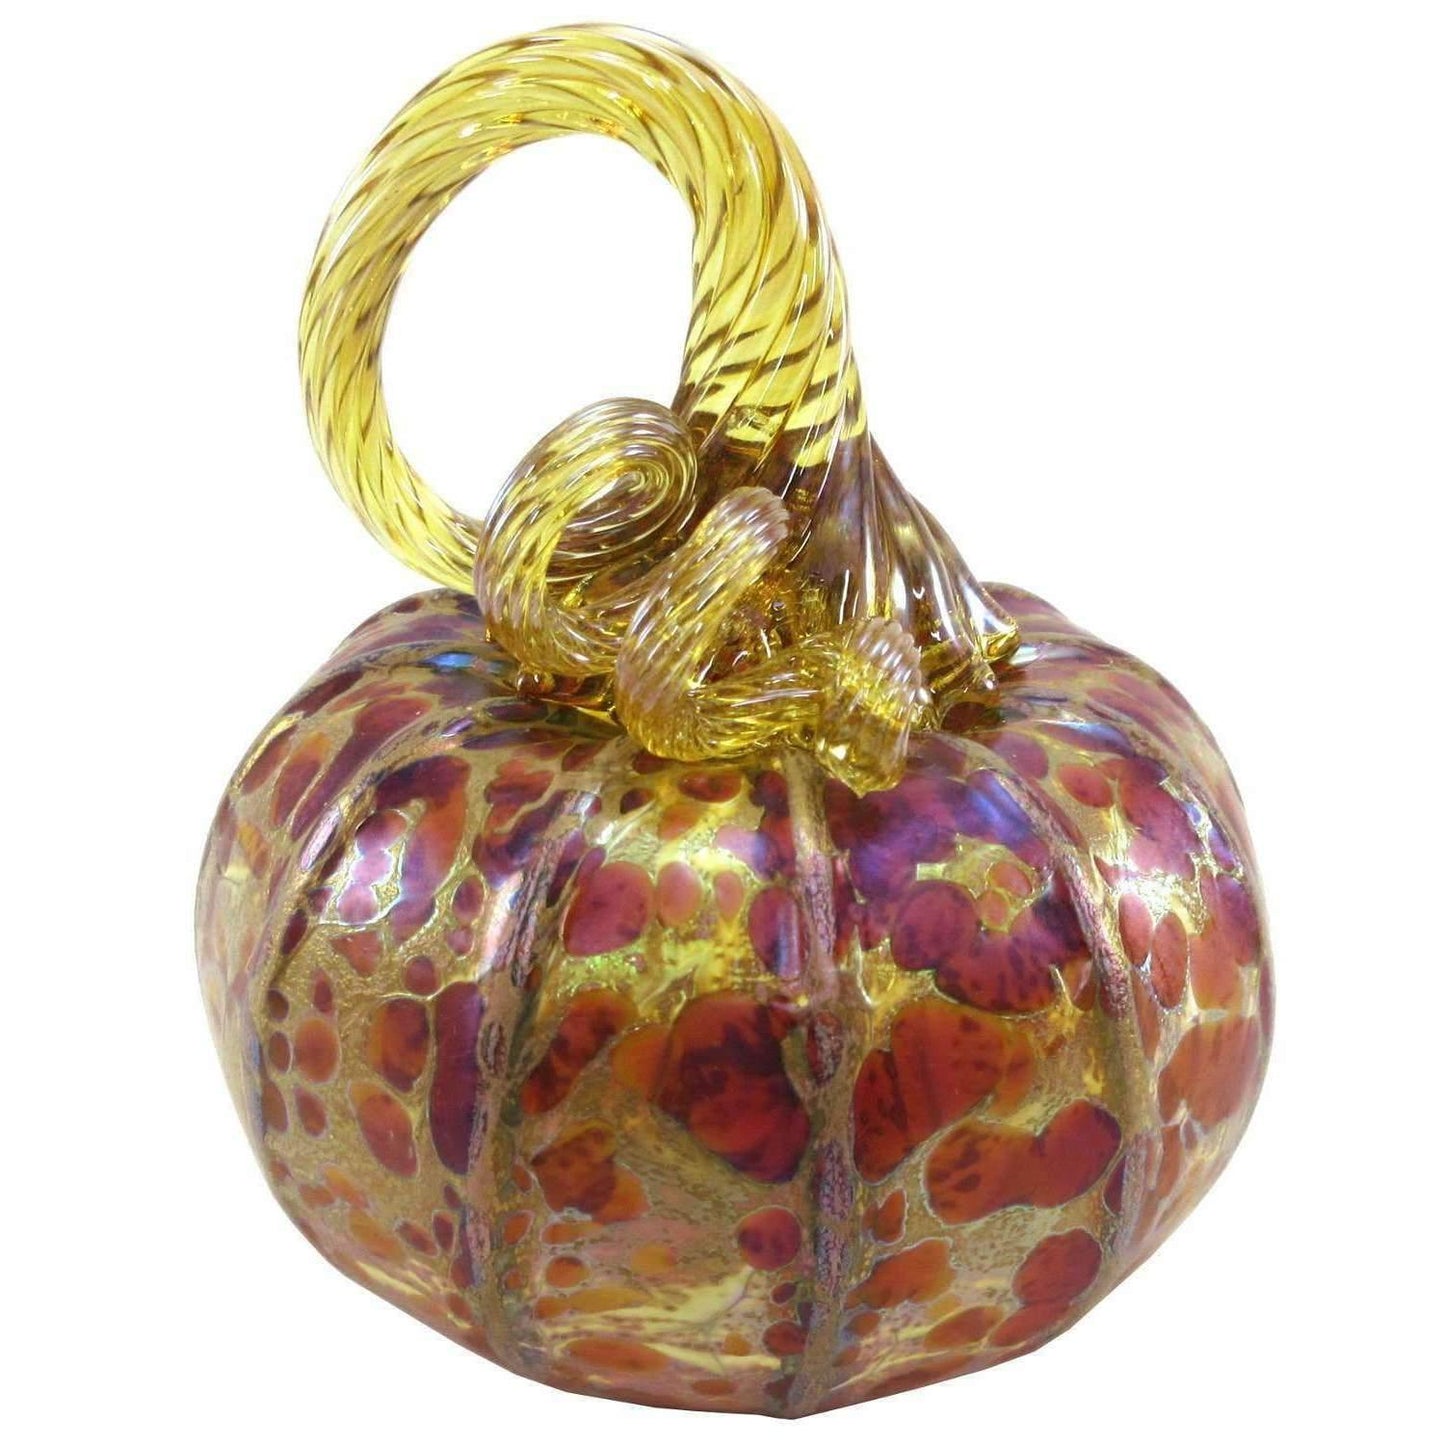 Blown Glass Pumpkin in Harvest Gifts Furnace Glass Works Large 